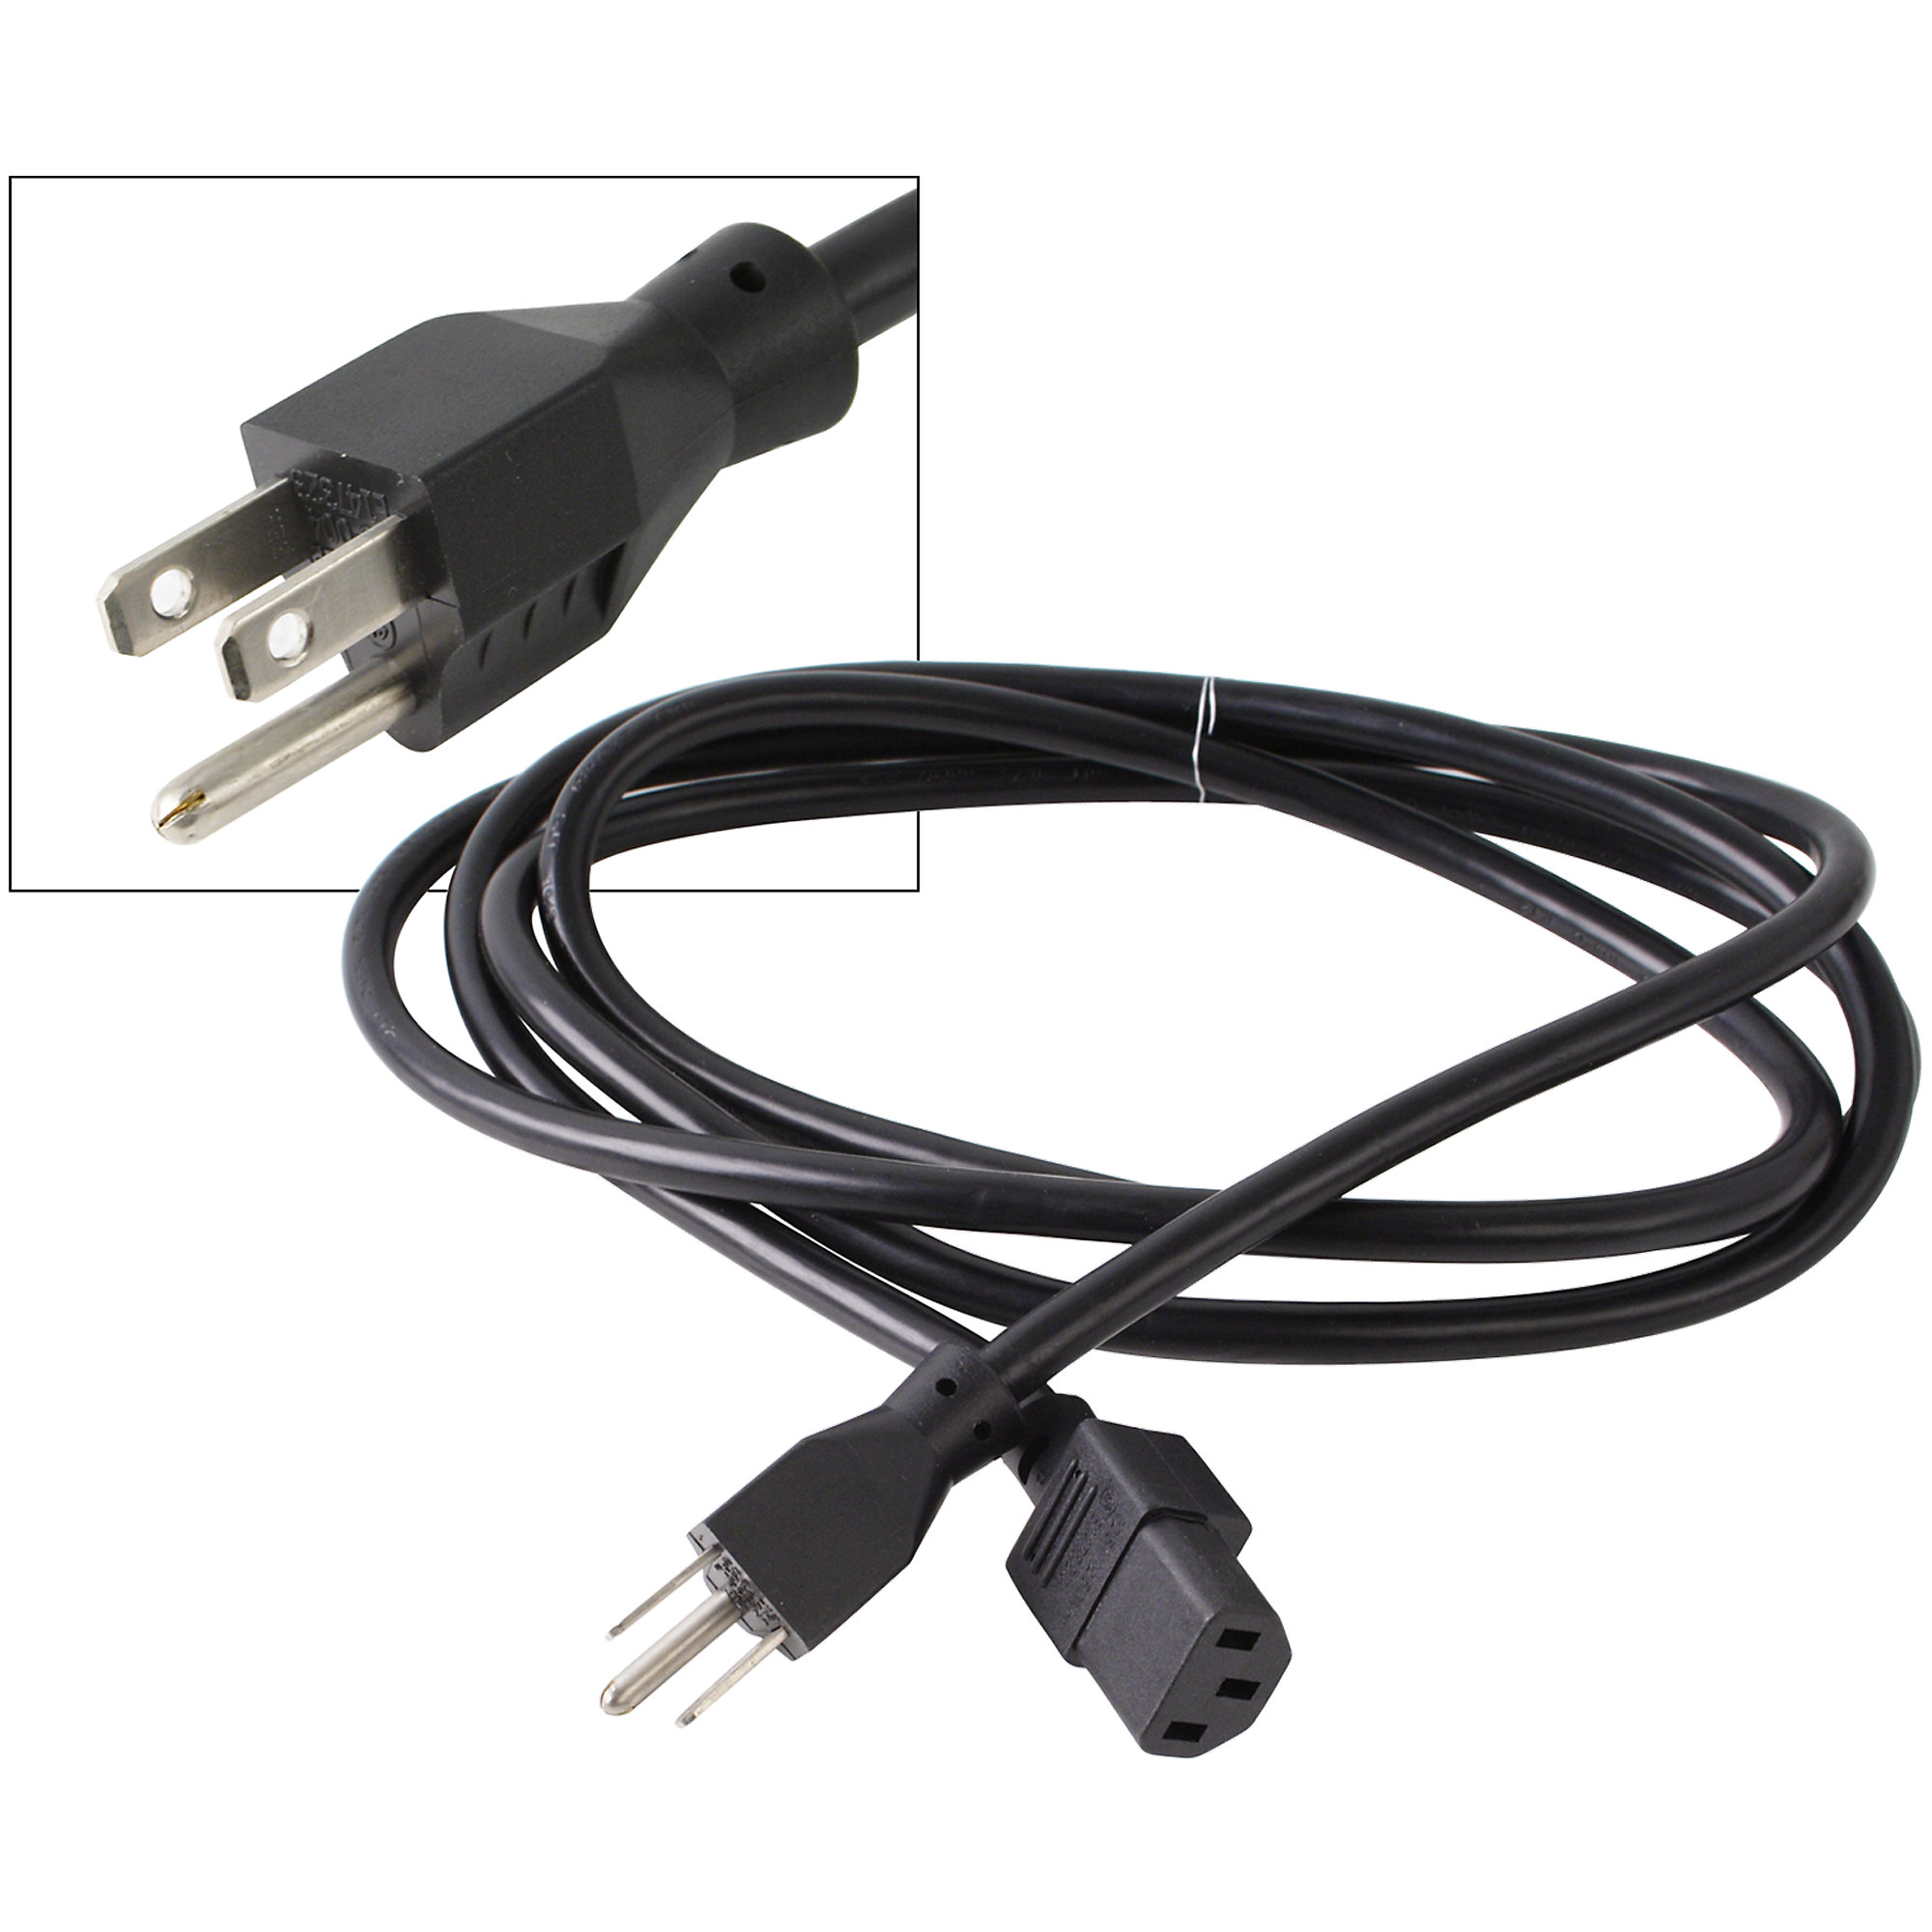 Power Cord | Connects Power Supply To Outlet | Domestic | Stairmaster